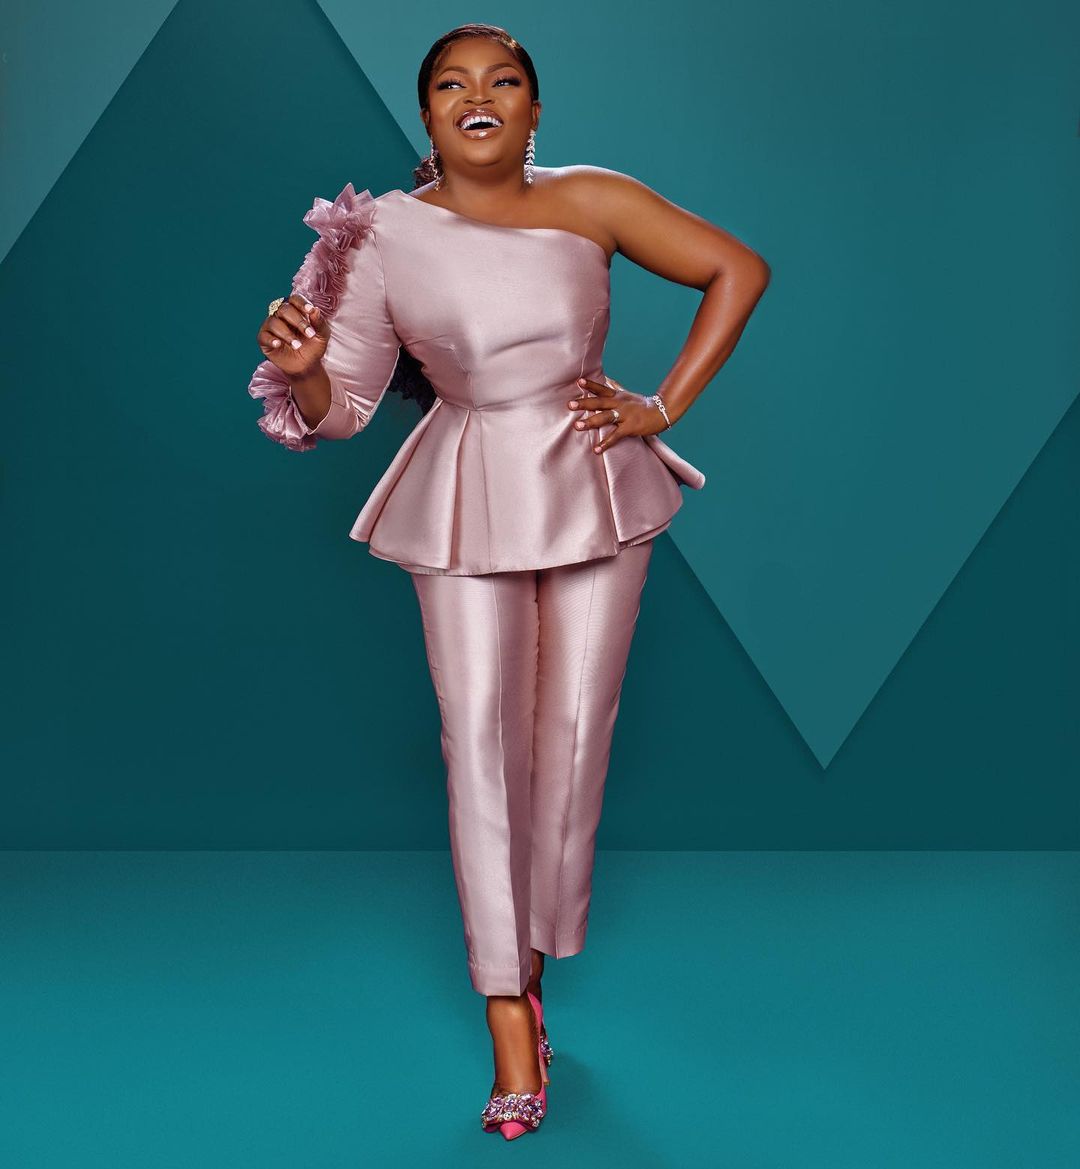  Funke Akindele Is The Wedding Guest Inspiration Always Ready To Dazzle